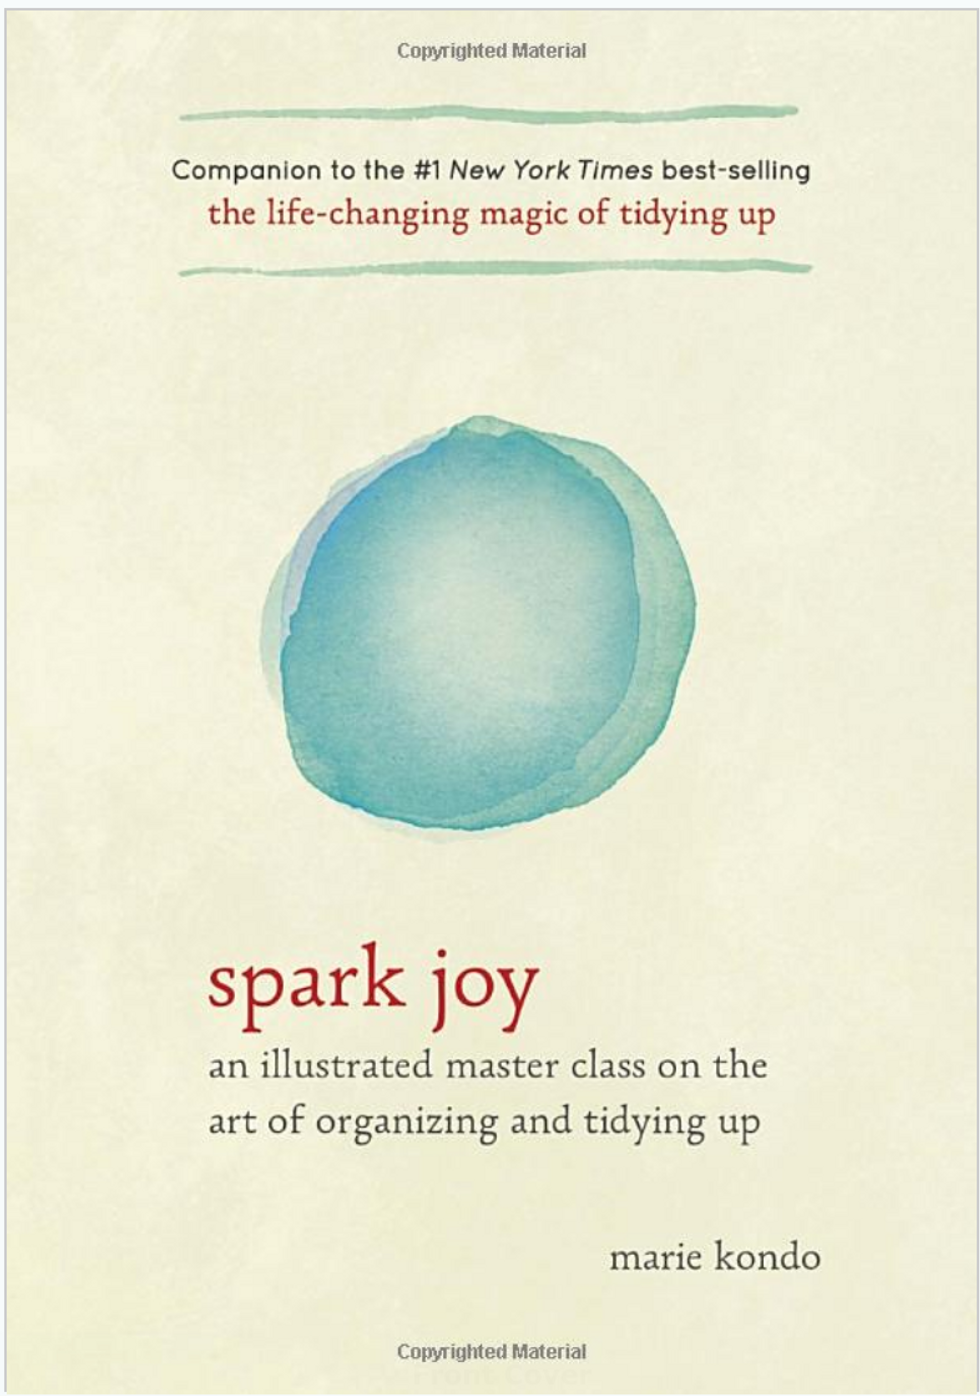 Buy Spark Joy: An Illustrated Master Class on the Art of Organizing and Tidying Up (The Life Changing Magic of Tidying Up) on Amazon